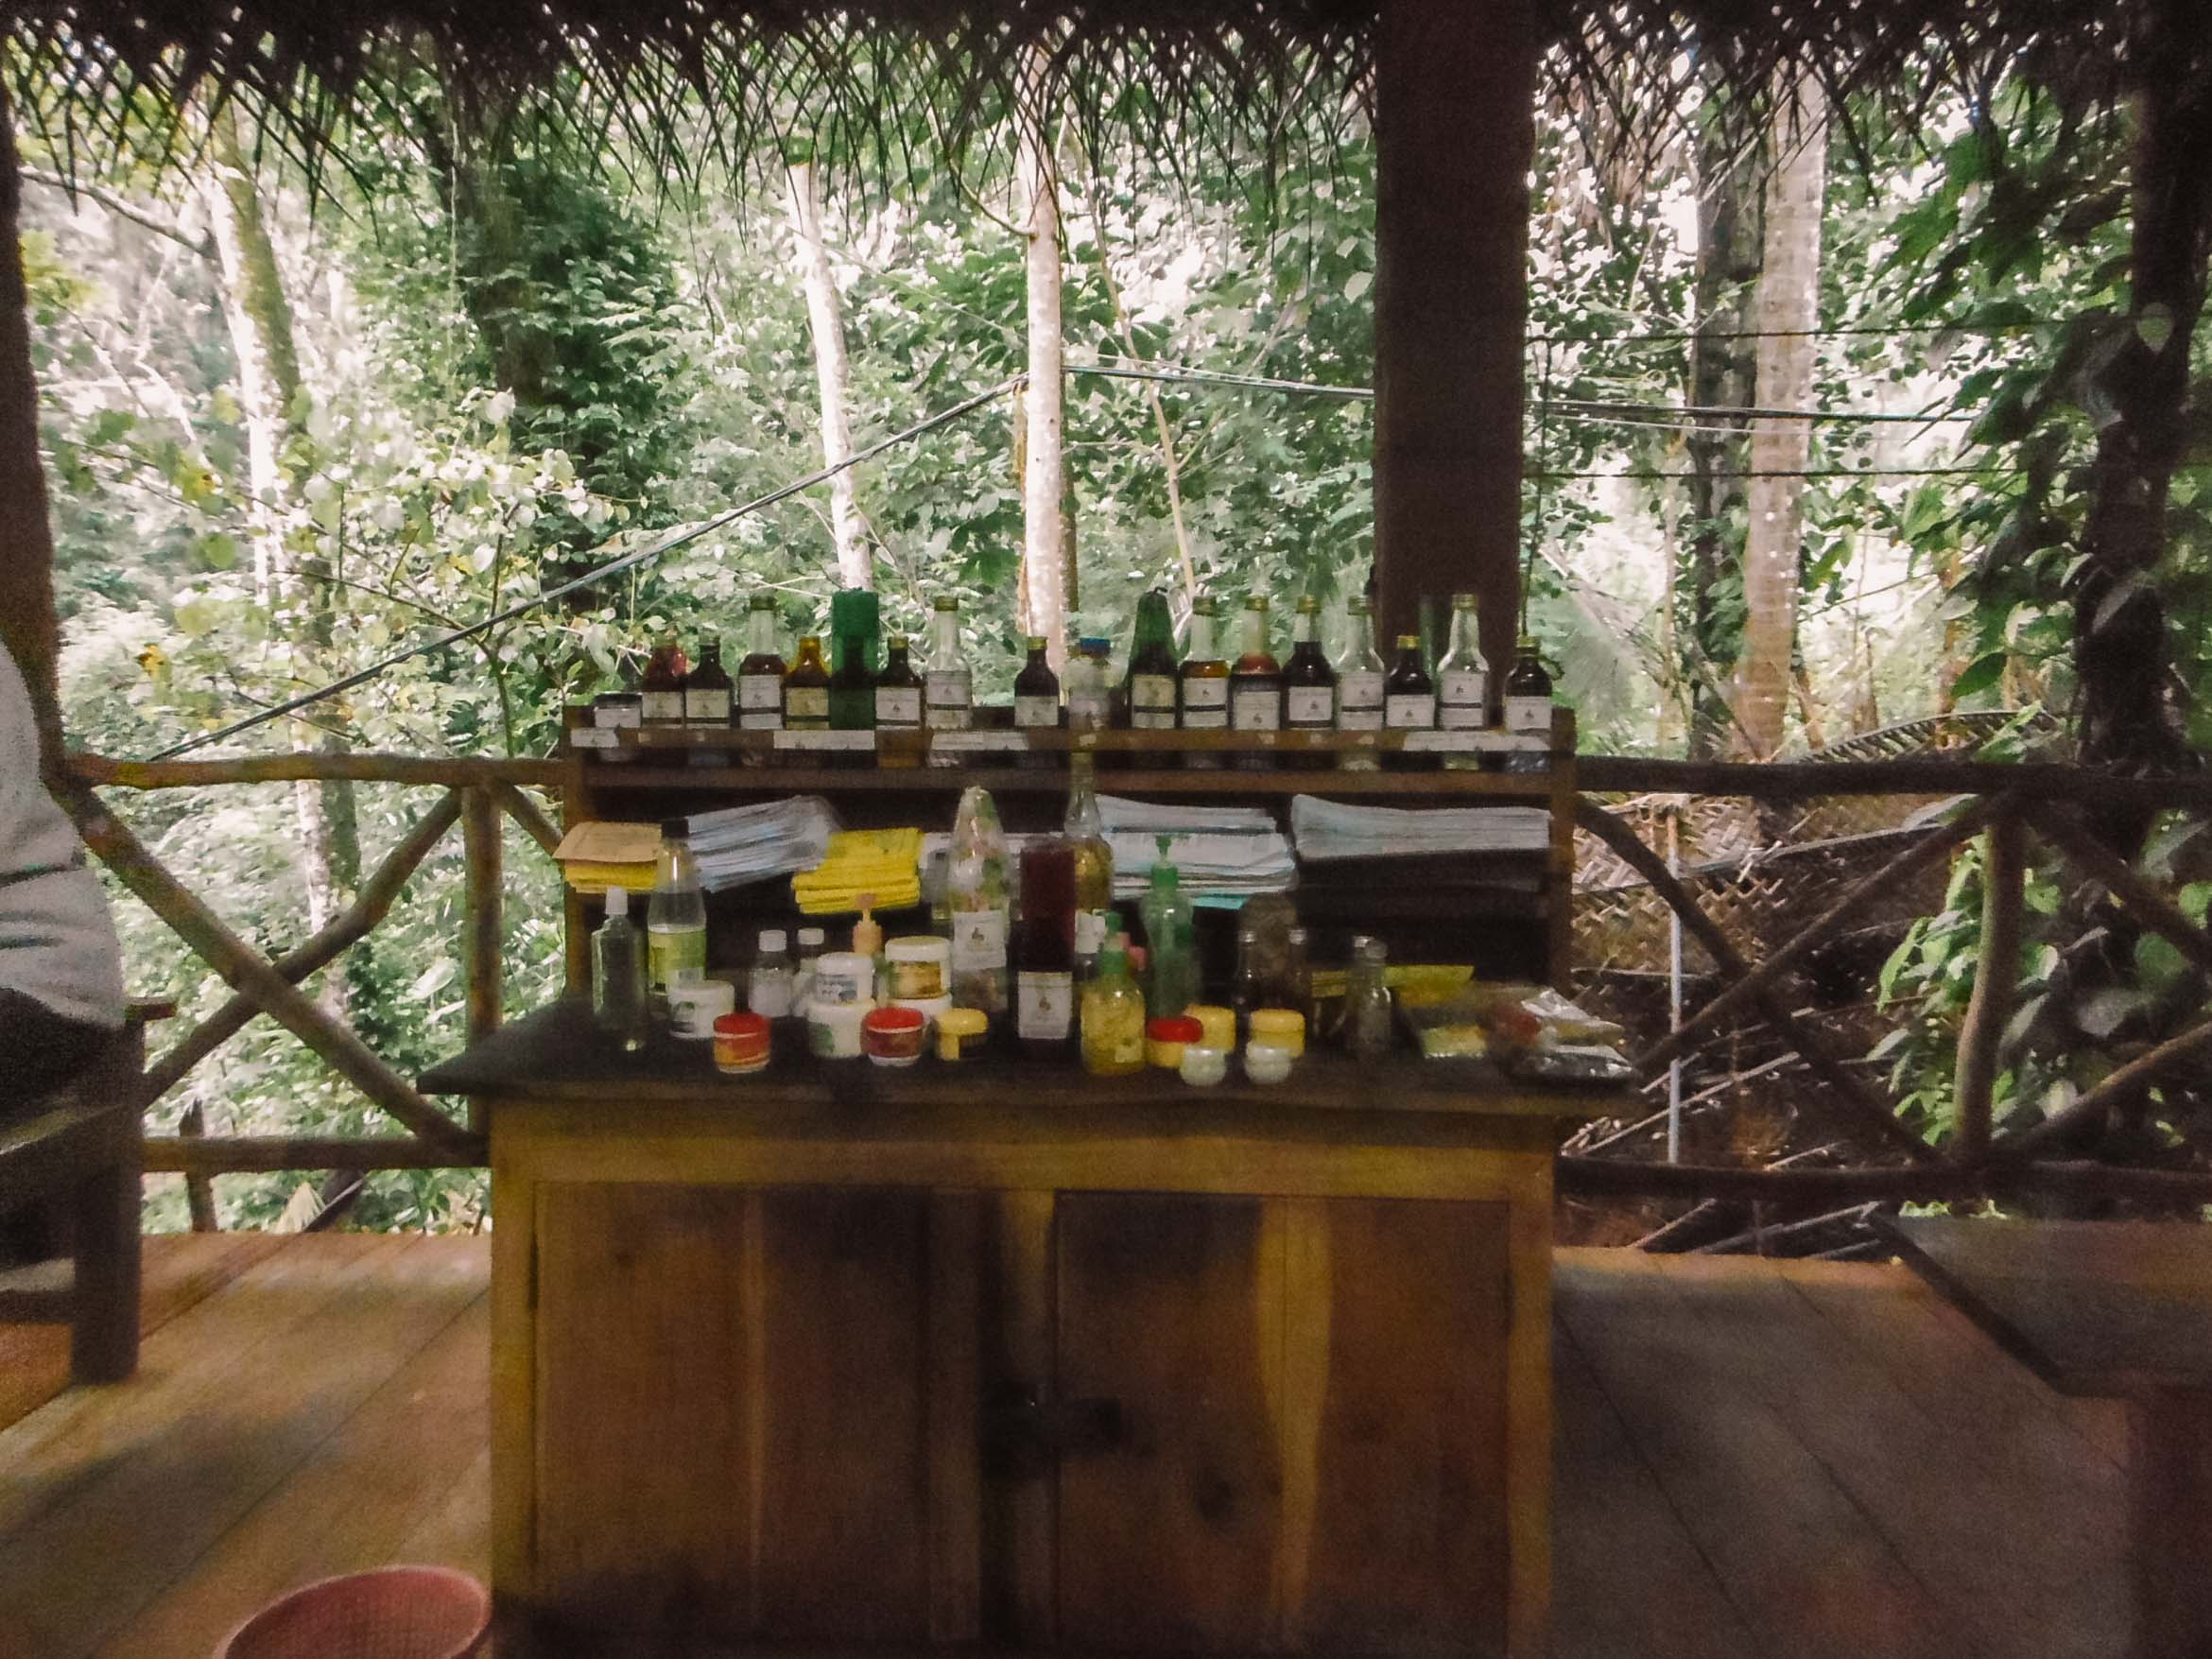 medicines on display in the rainforest planation